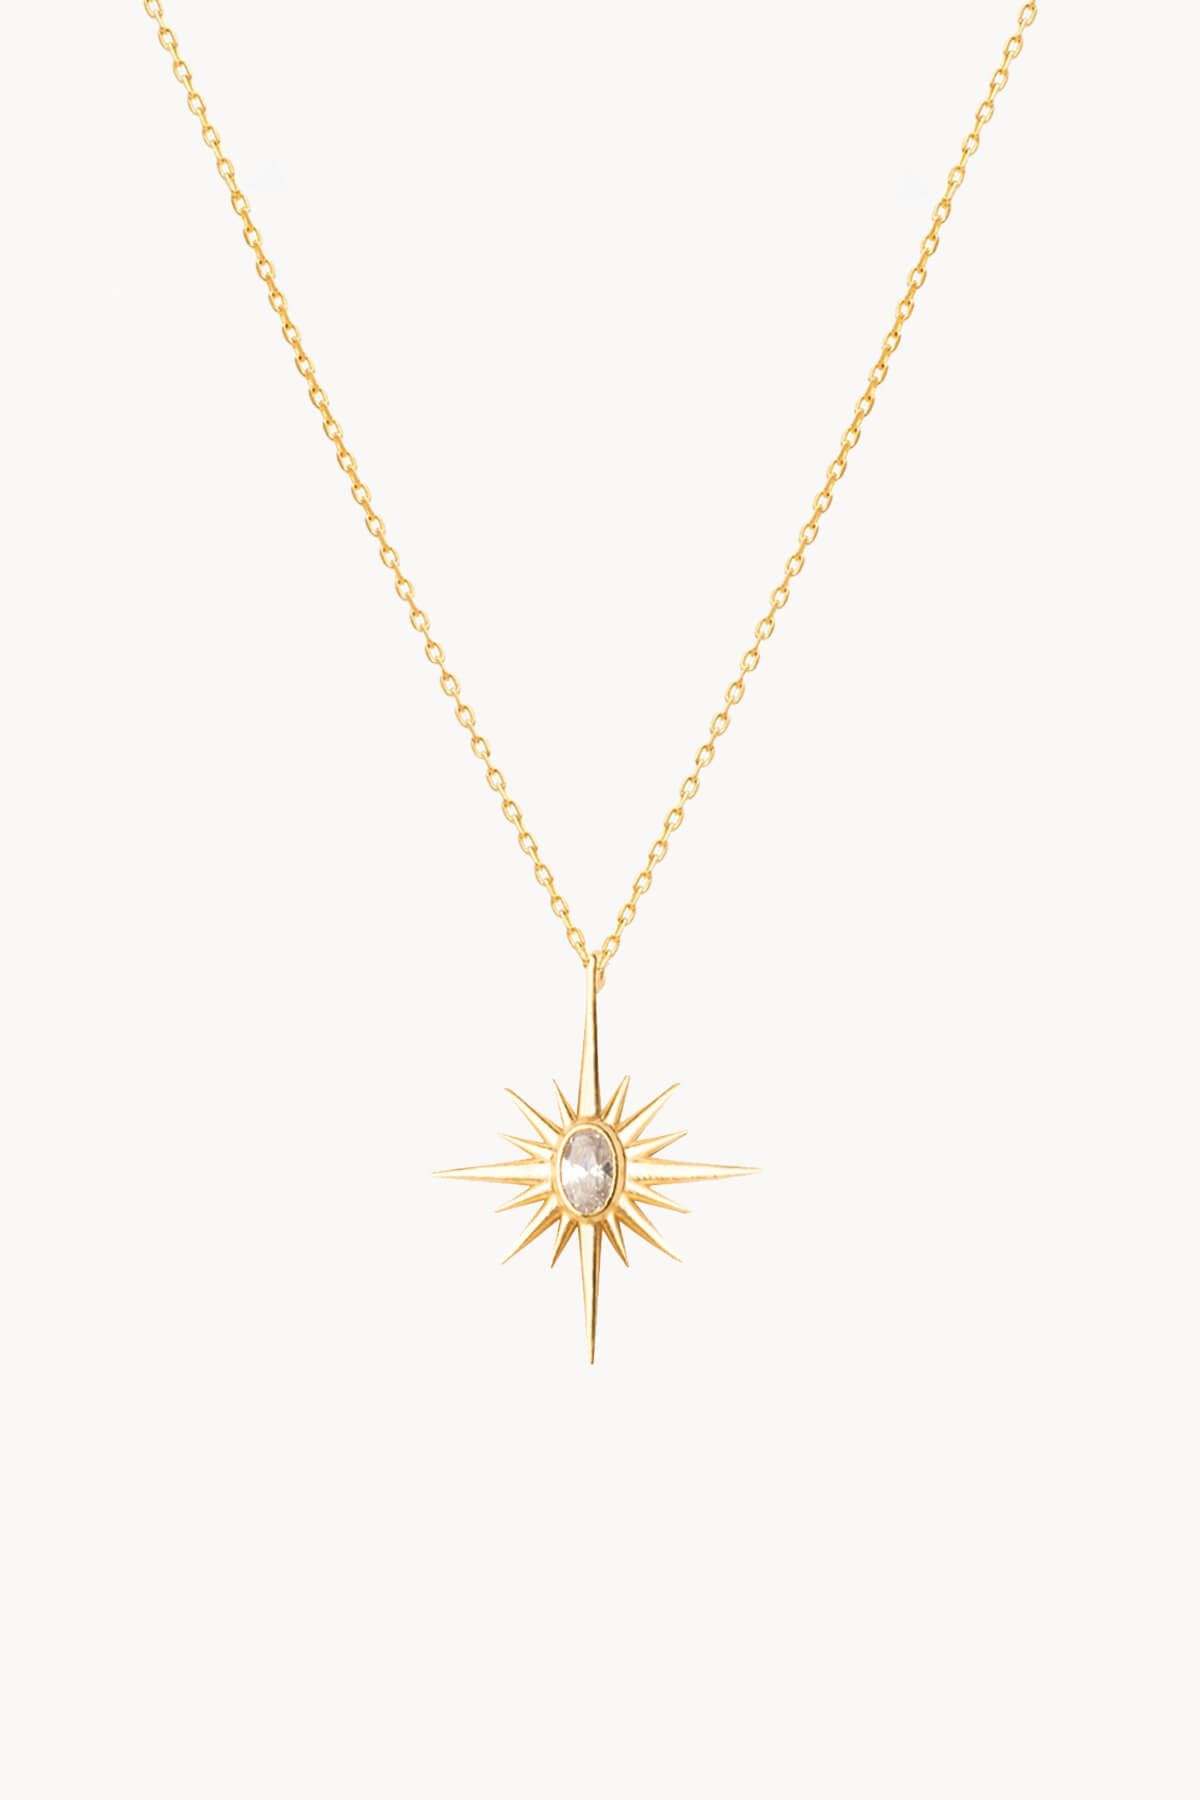 Star Necklace Zircon Stone Gold Plated